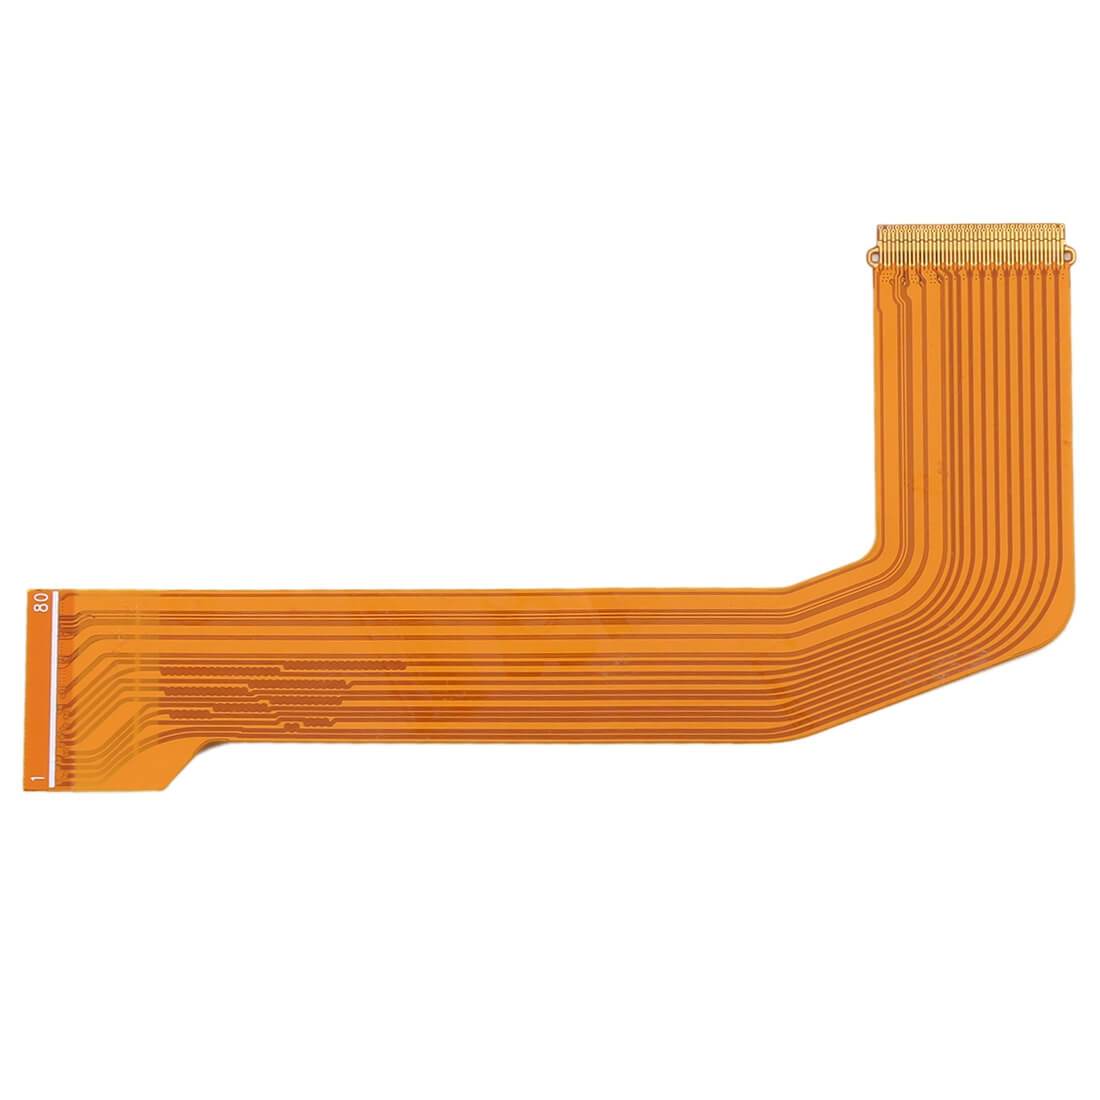 Main LCD Internal Flex Cable For Samsung Galaxy Tab S3 9.7 Replacement Connection